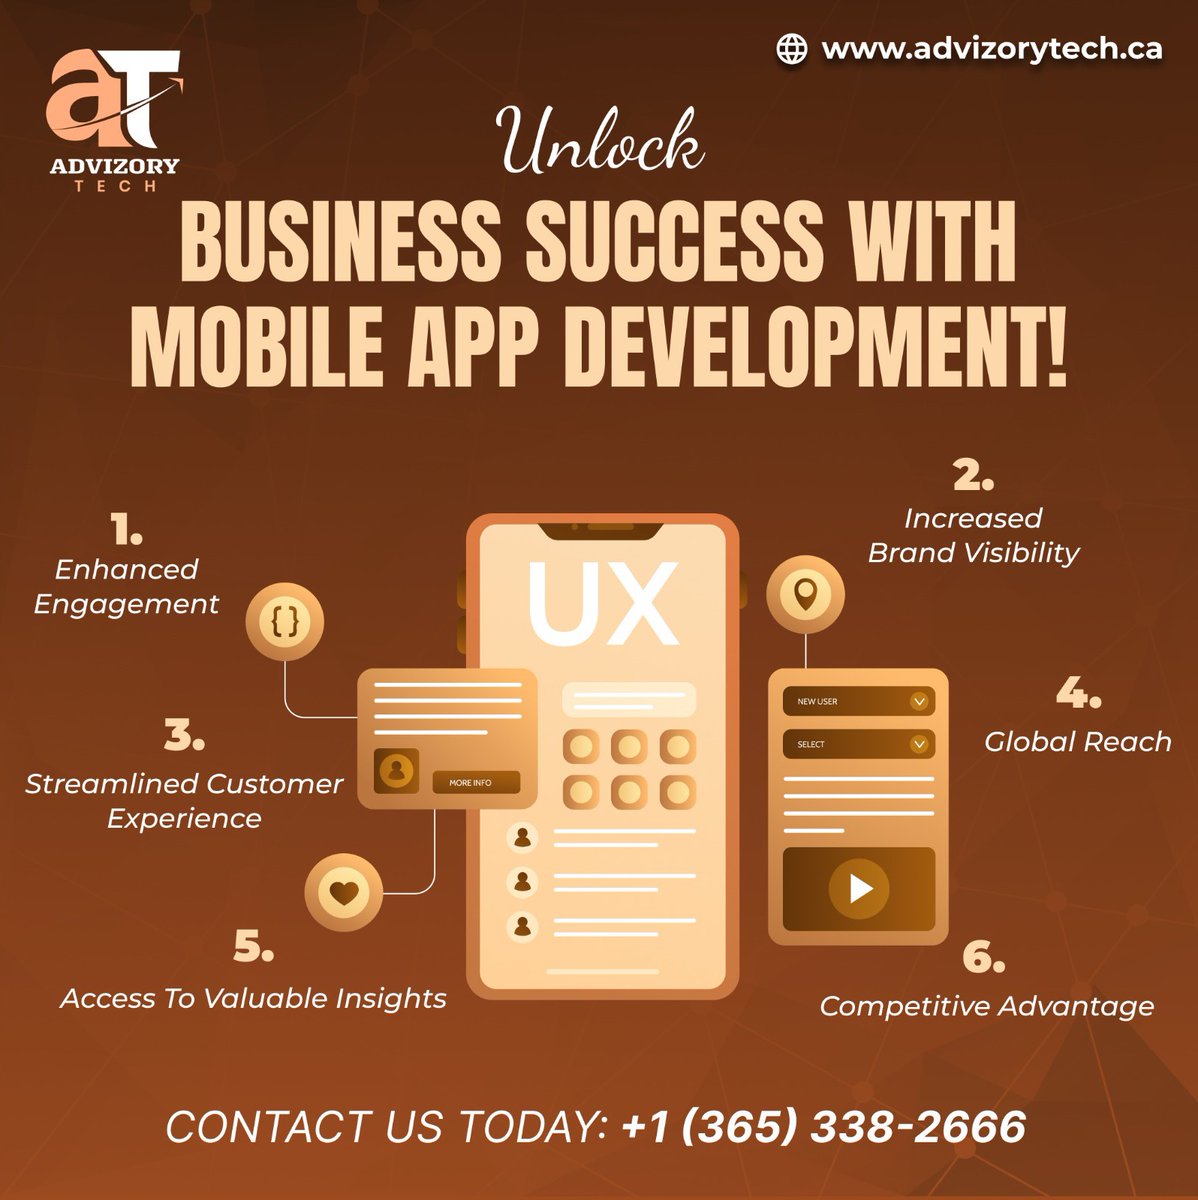 Unlock the next level of business success 🚀 with cutting-edge mobile app development!

Visit our website now!
advizorytech.ca

#MobileAppDevelopment #MobileApp #Application #iOS #AndroidApp #Development